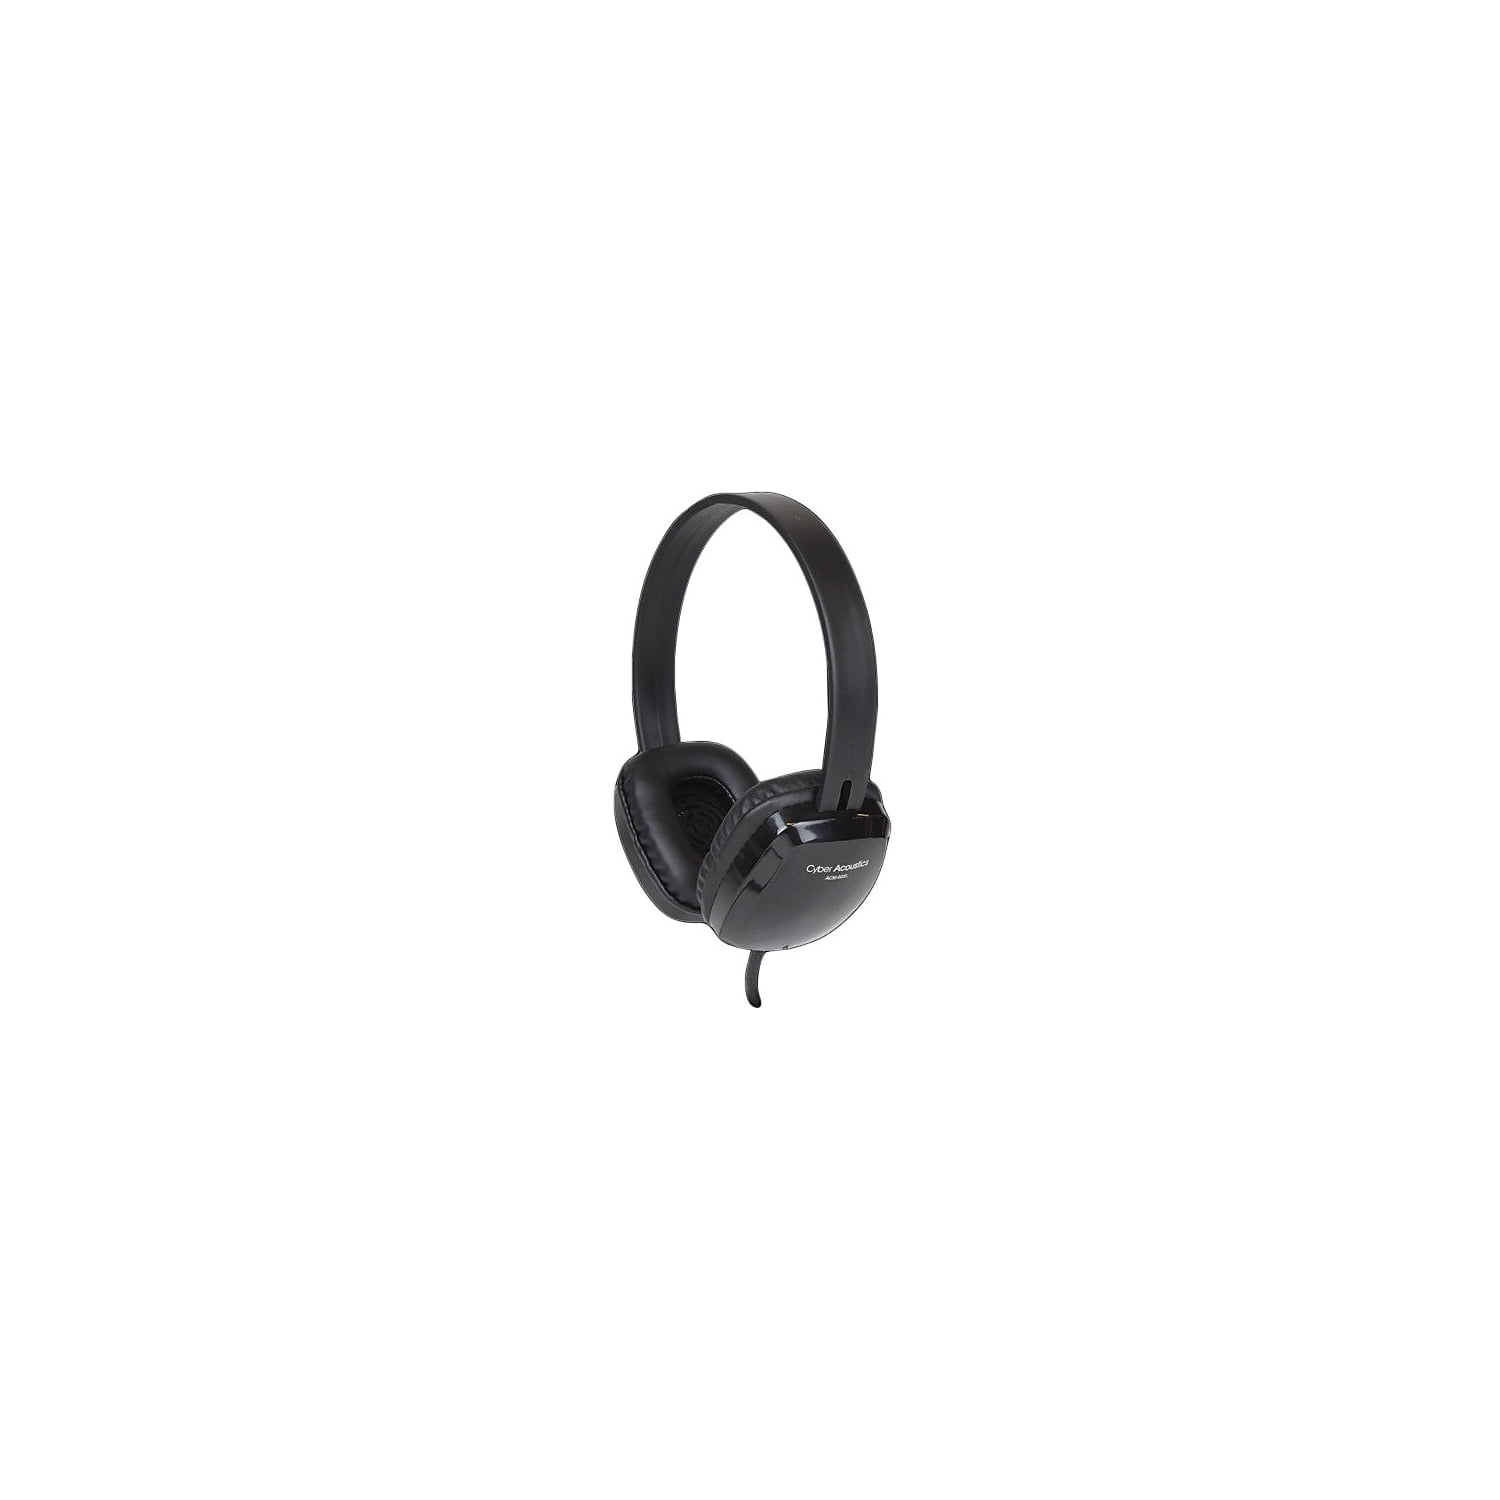 Picture of Cyber Acoustics ACM-6005 Over-Ear USB Stereo Headphone